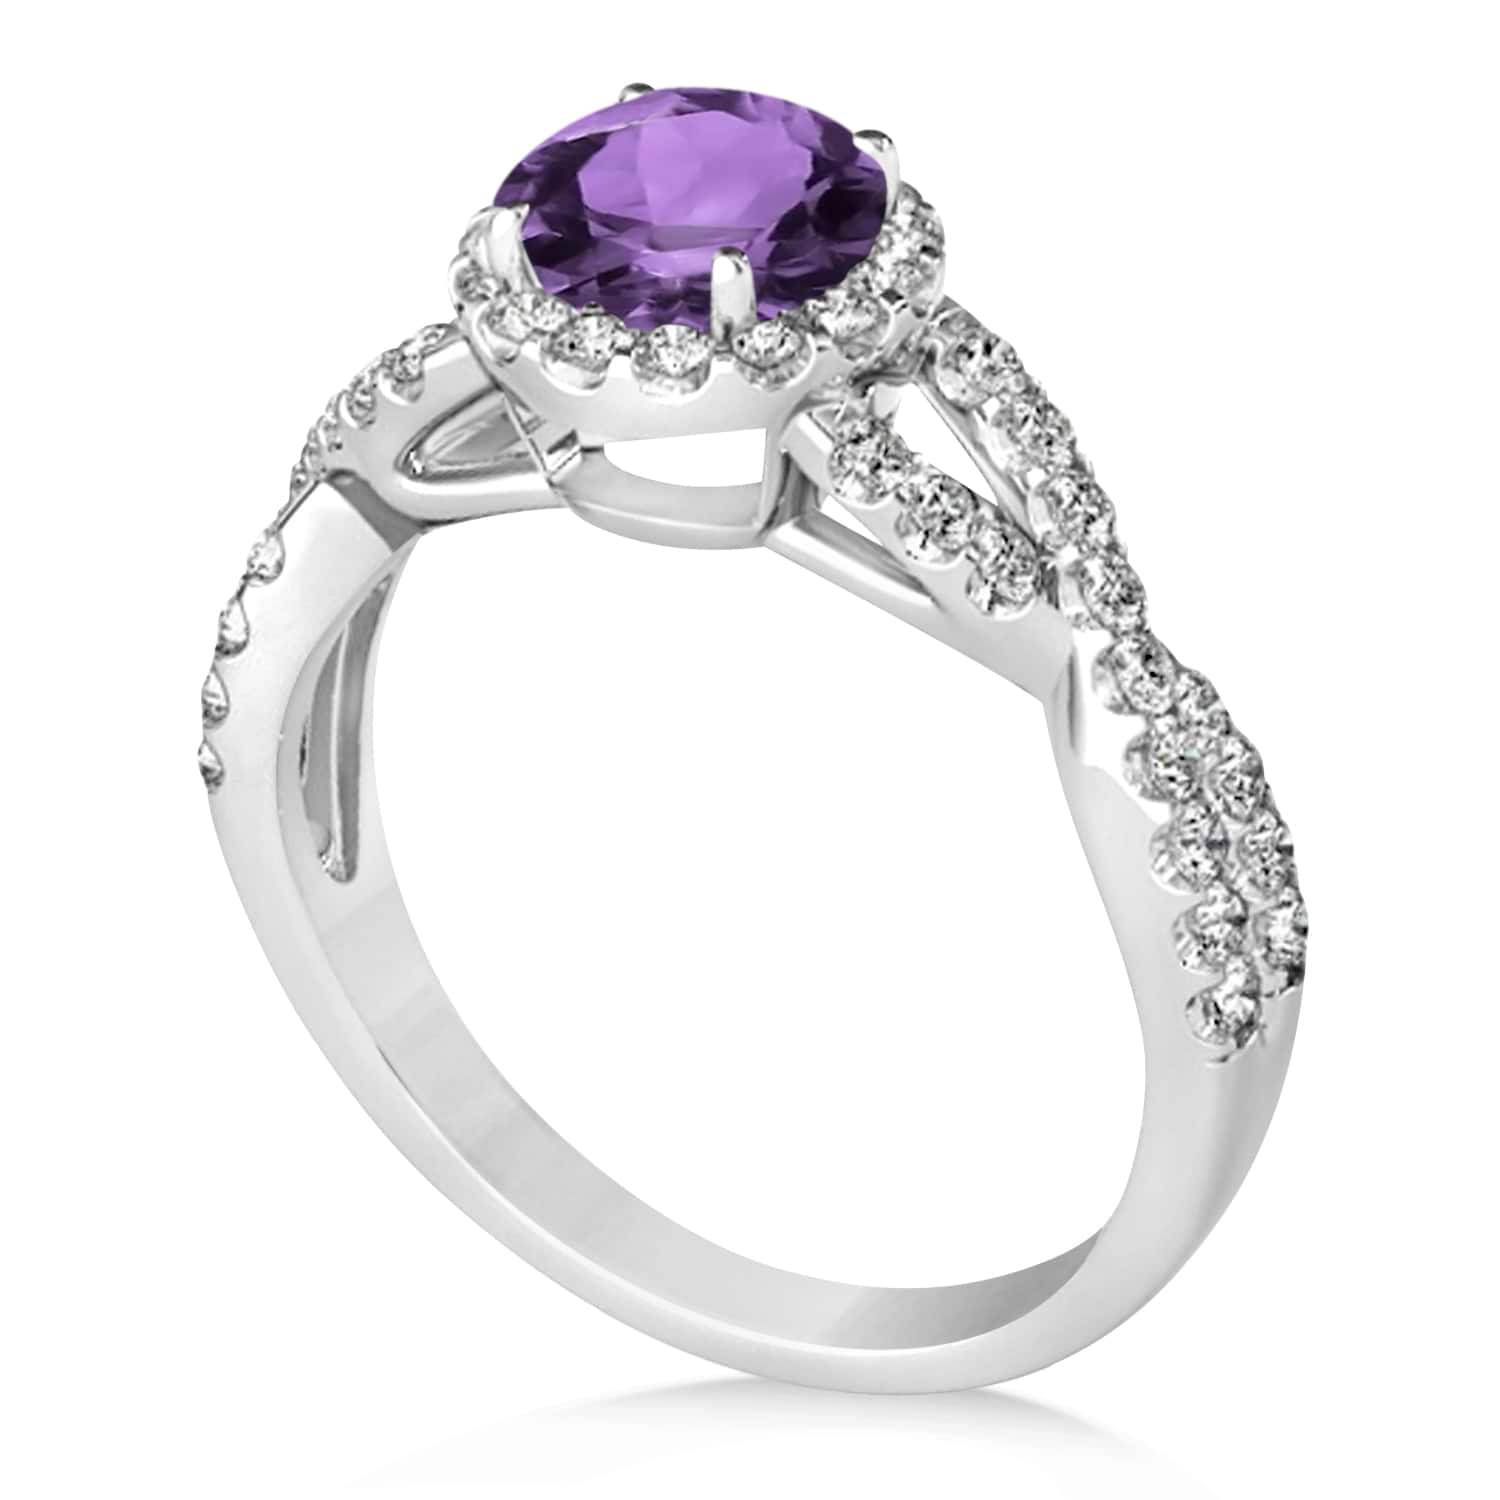 Amethyst & Diamond Twisted Engagement Ring 18k White Gold 1.20ct